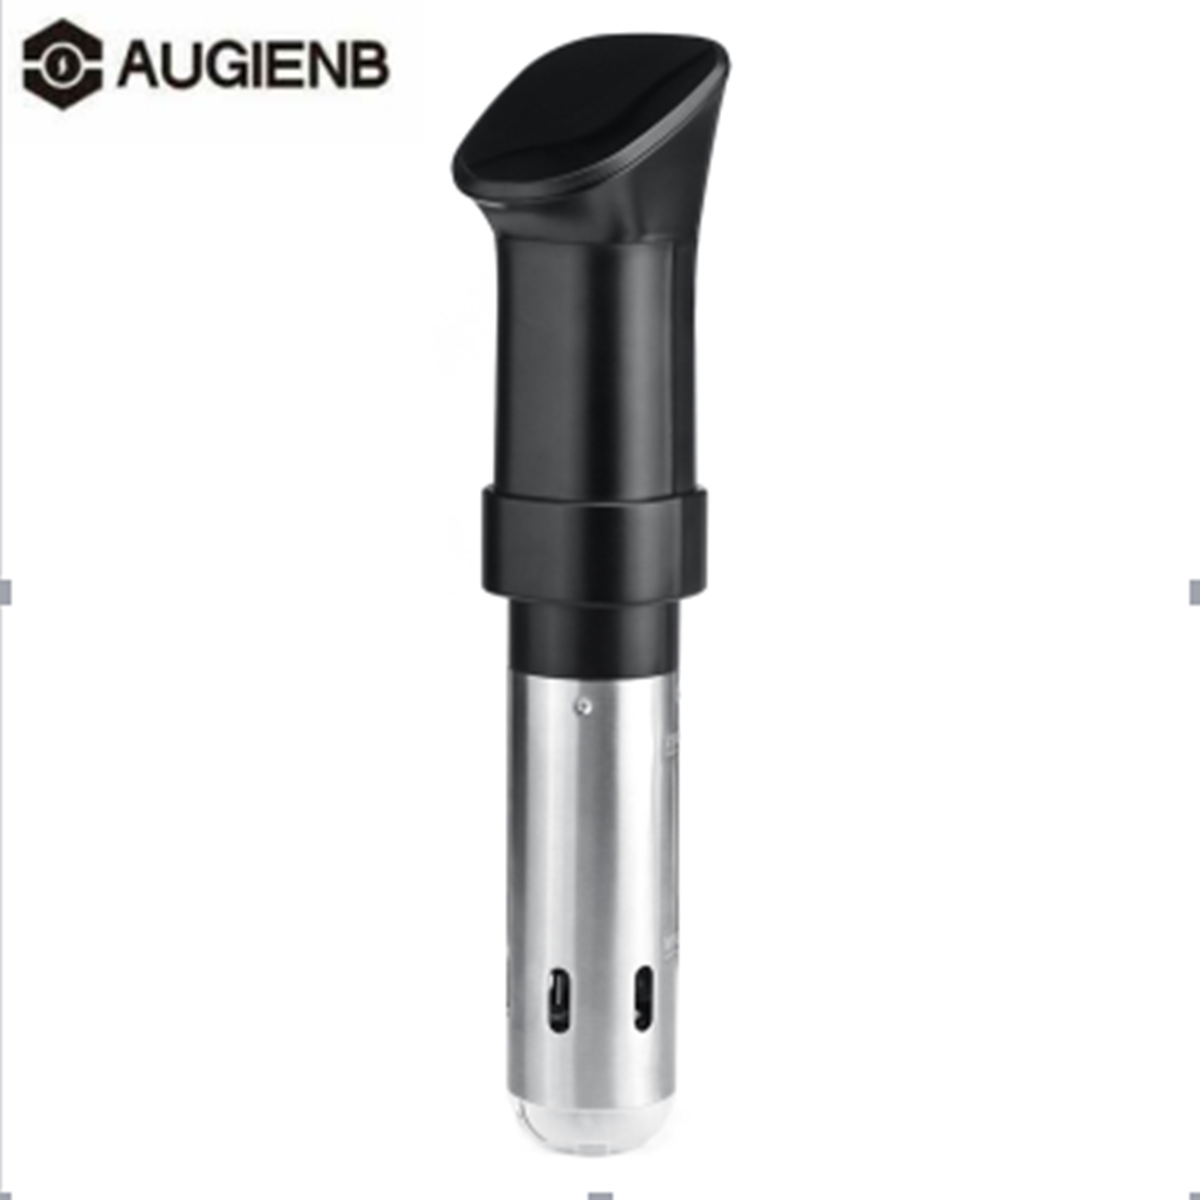 AUGIENB-SC-003-1600W-LCD-Touch-Sous-Vide-Cooker-Waterproof-Sous-Vide-Immersion-Circulator-Vacuum-Hea-1936799-7